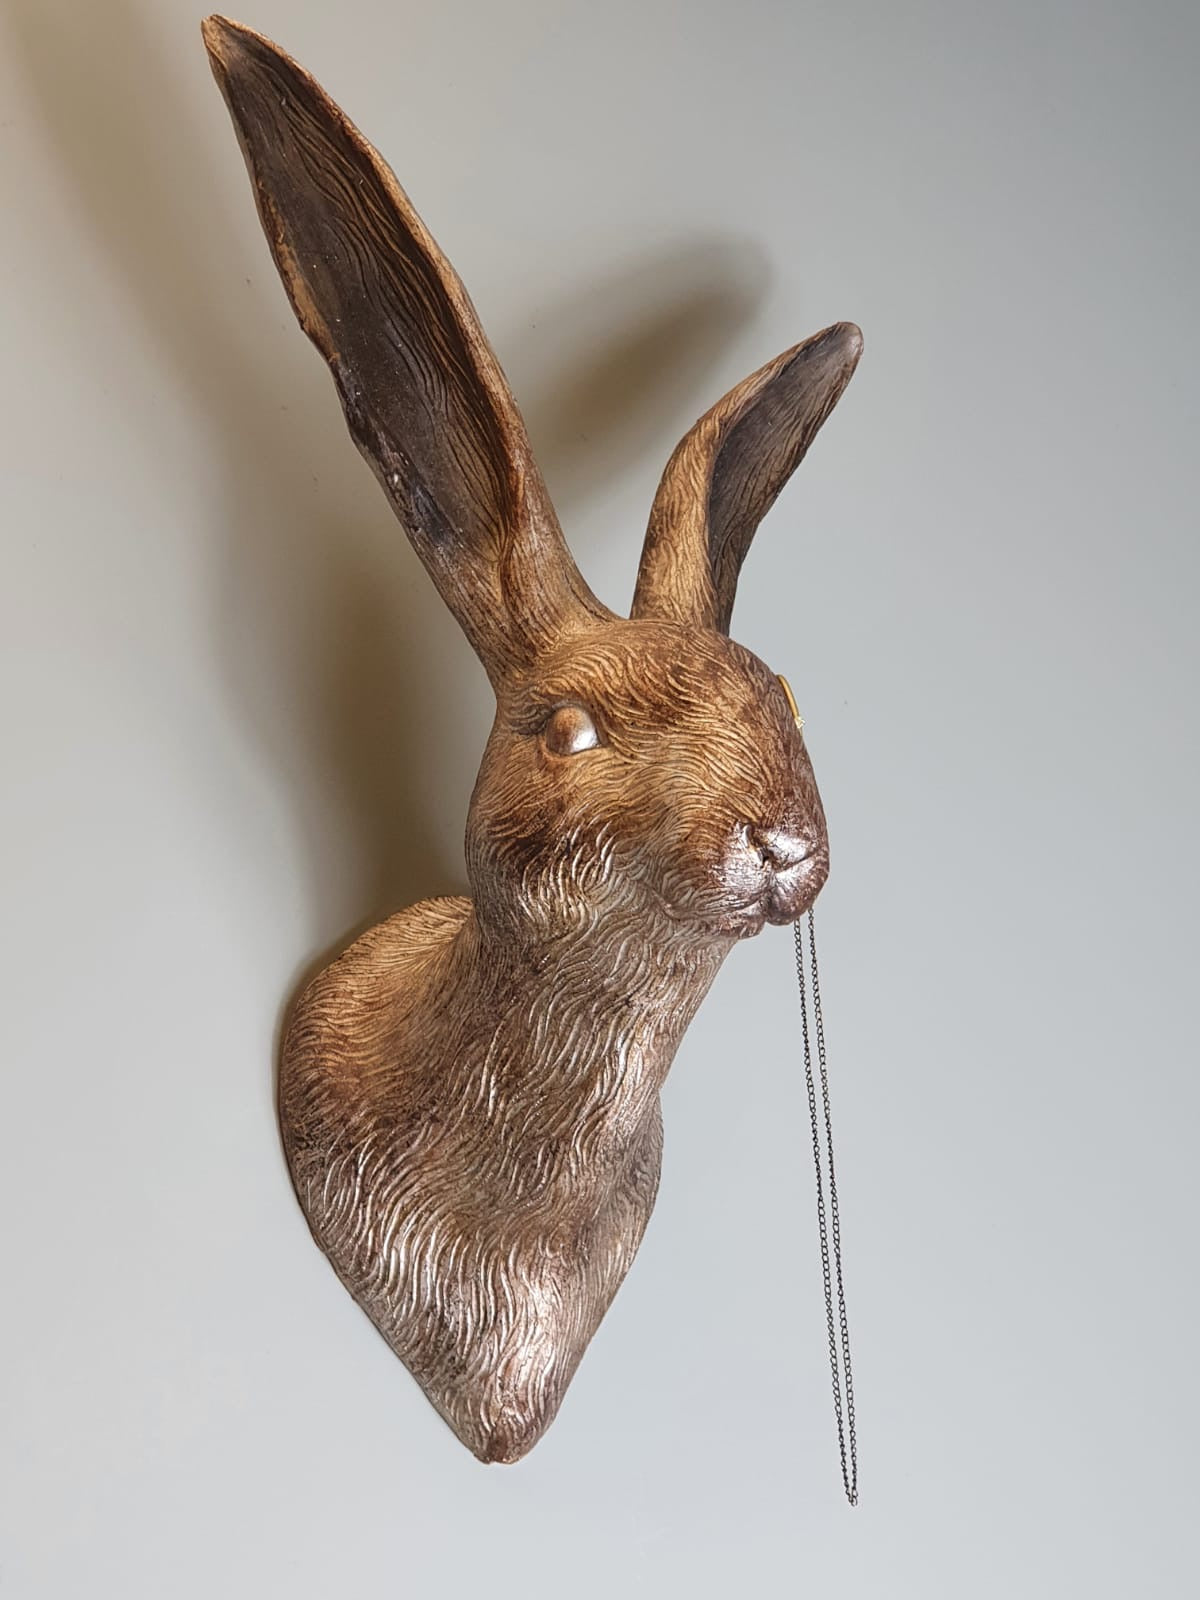 Hare with Monacle